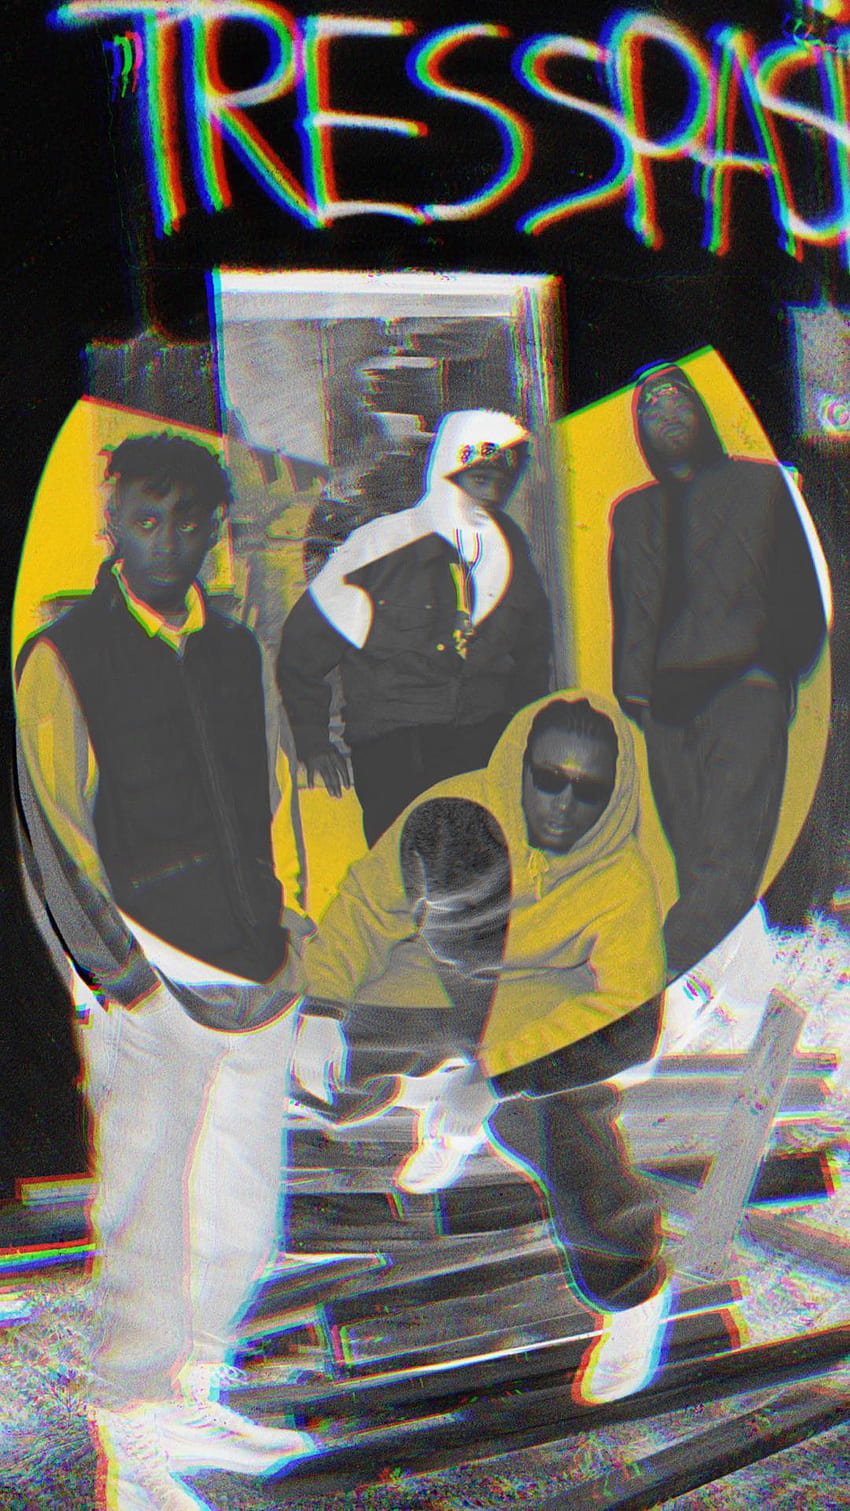 Made This Out Of An Old Of GZA, Ol' Dirty Bastard, RZA, And Method Man : R Wutang HD phone wallpaper